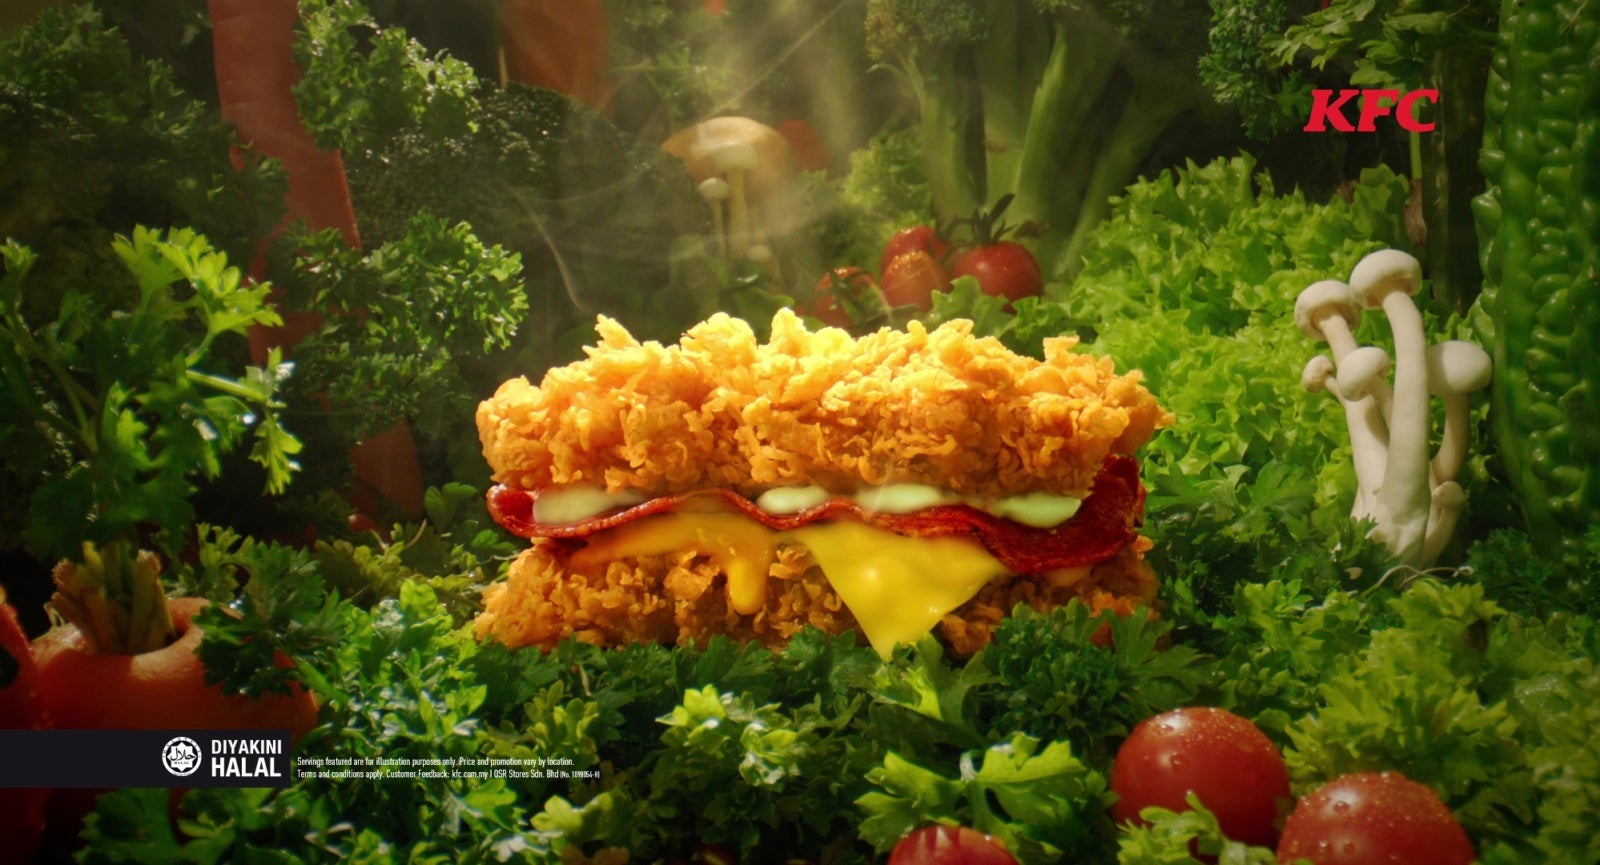 KFC Malaysia is Bringing Back The Zinger Double Down Starting 27 August For a Limited Time Only - WORLD OF BUZZ 1